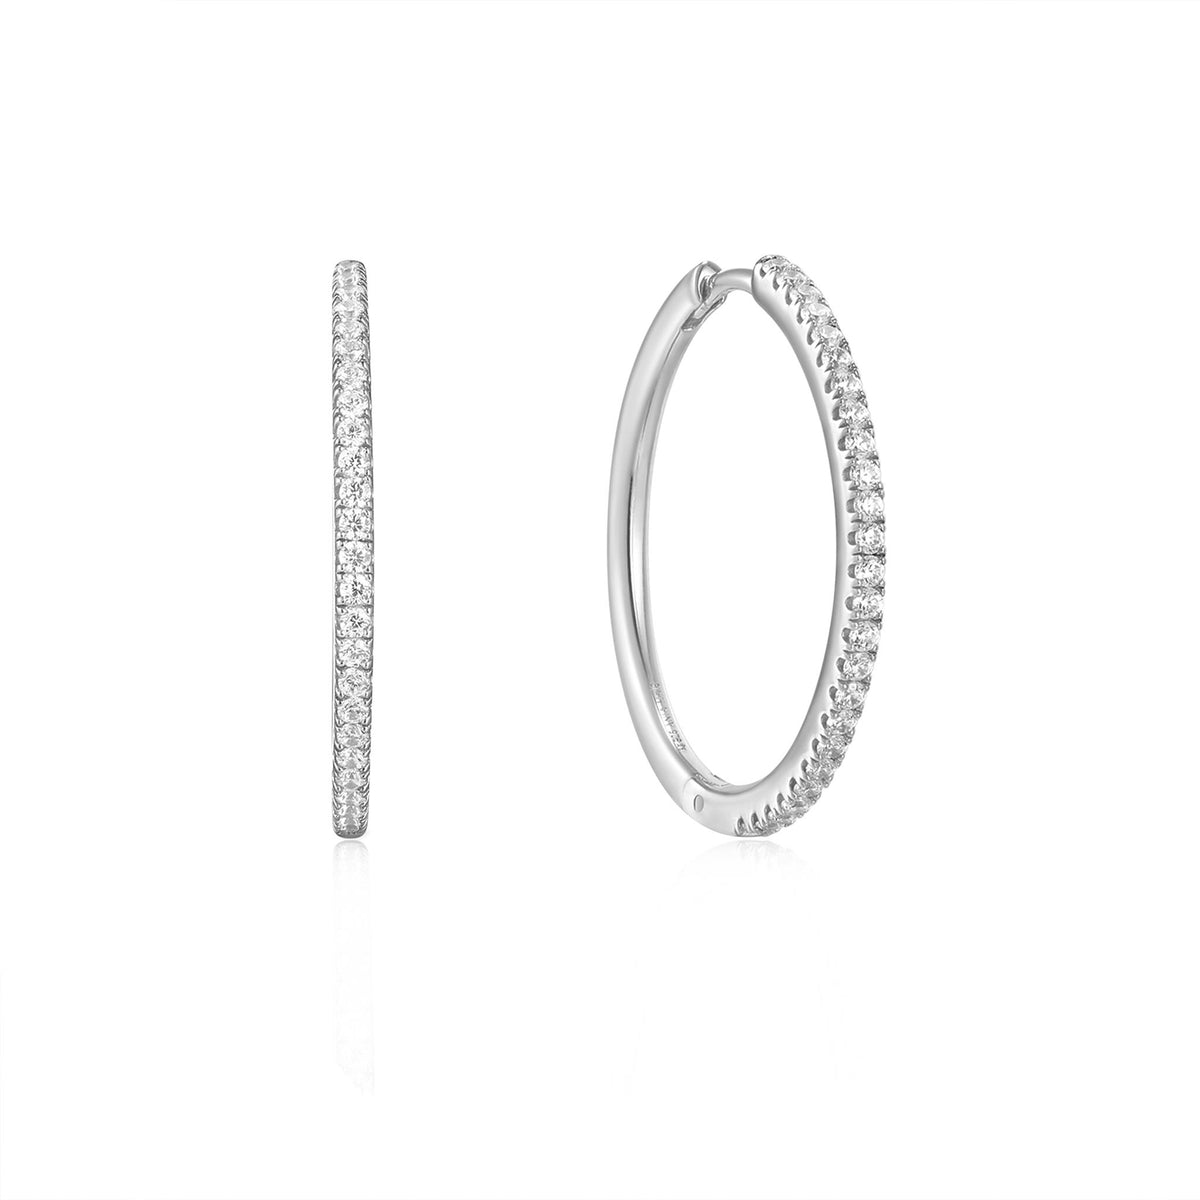 Sterling Silver 20mm Round Hoop Earrings with Cubic Zirconia